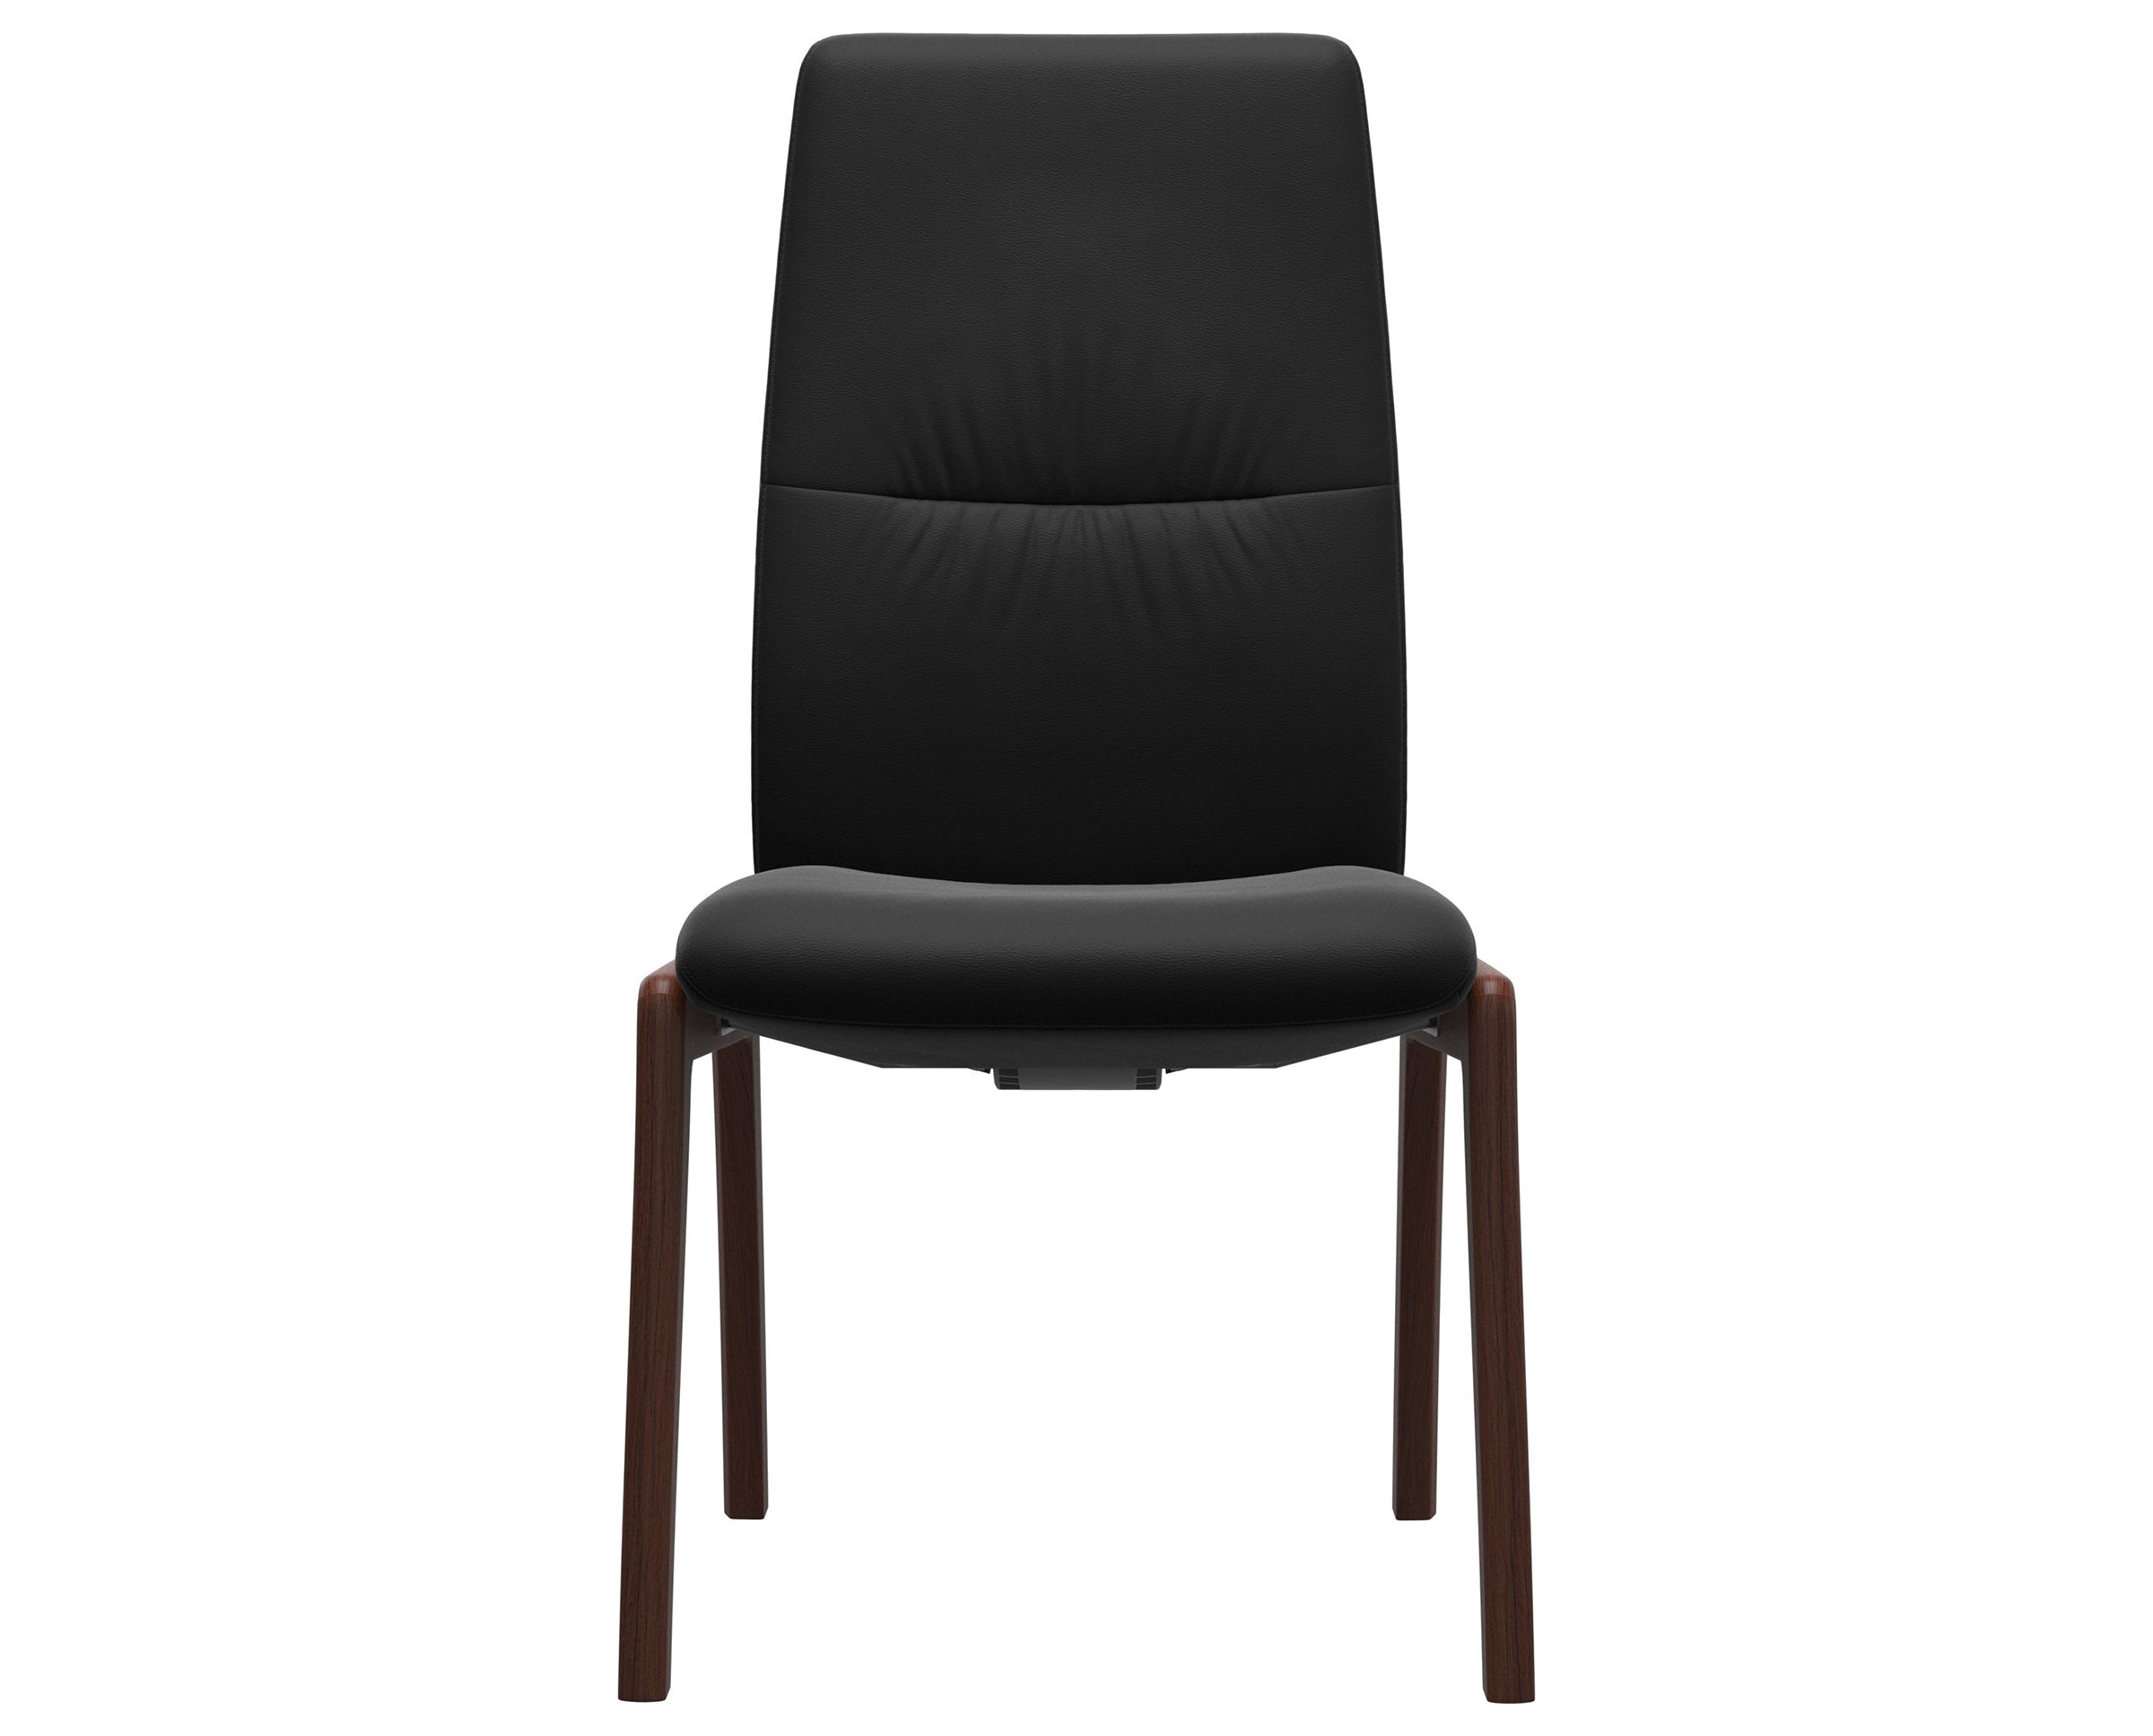 Paloma Leather Black and Walnut Base | Stressless Mint High Back D100 Dining Chair | Valley Ridge Furniture